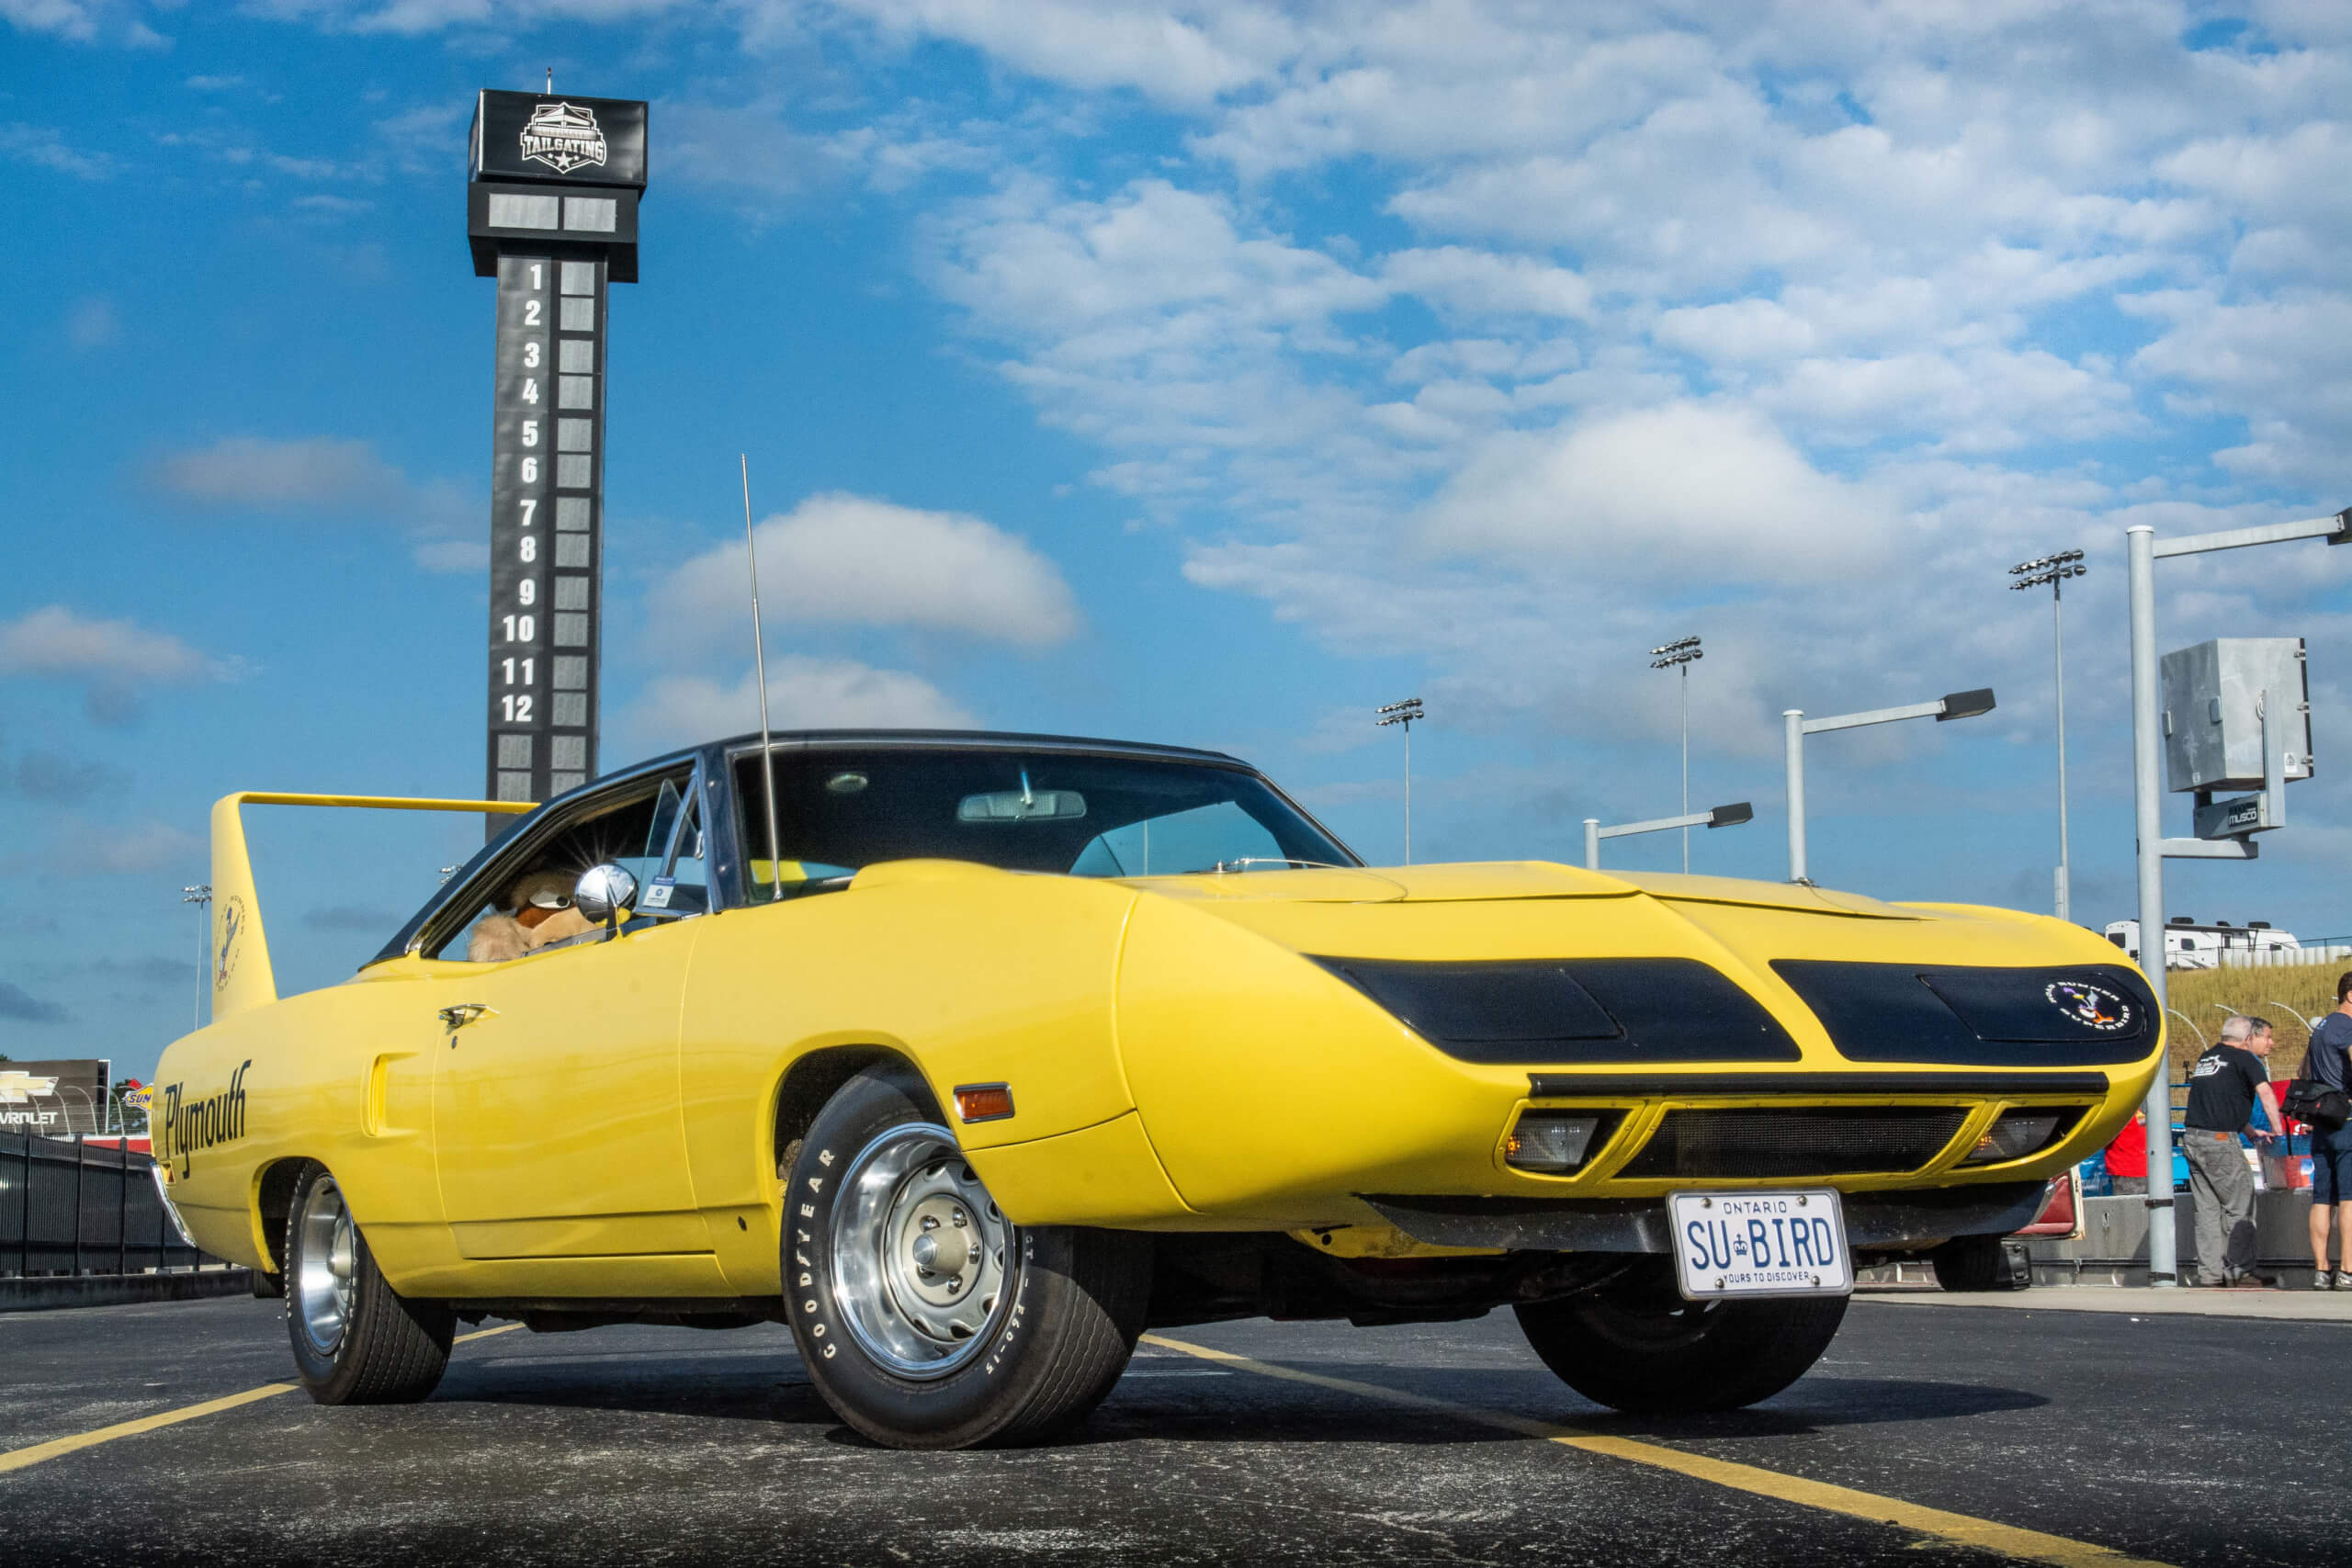 Wayne O'Shea brought his 1970 Plymouth Super Bird from Canada to participate in the 2019 Aero Warrior Reunion's 50th Anniversary Celebration.